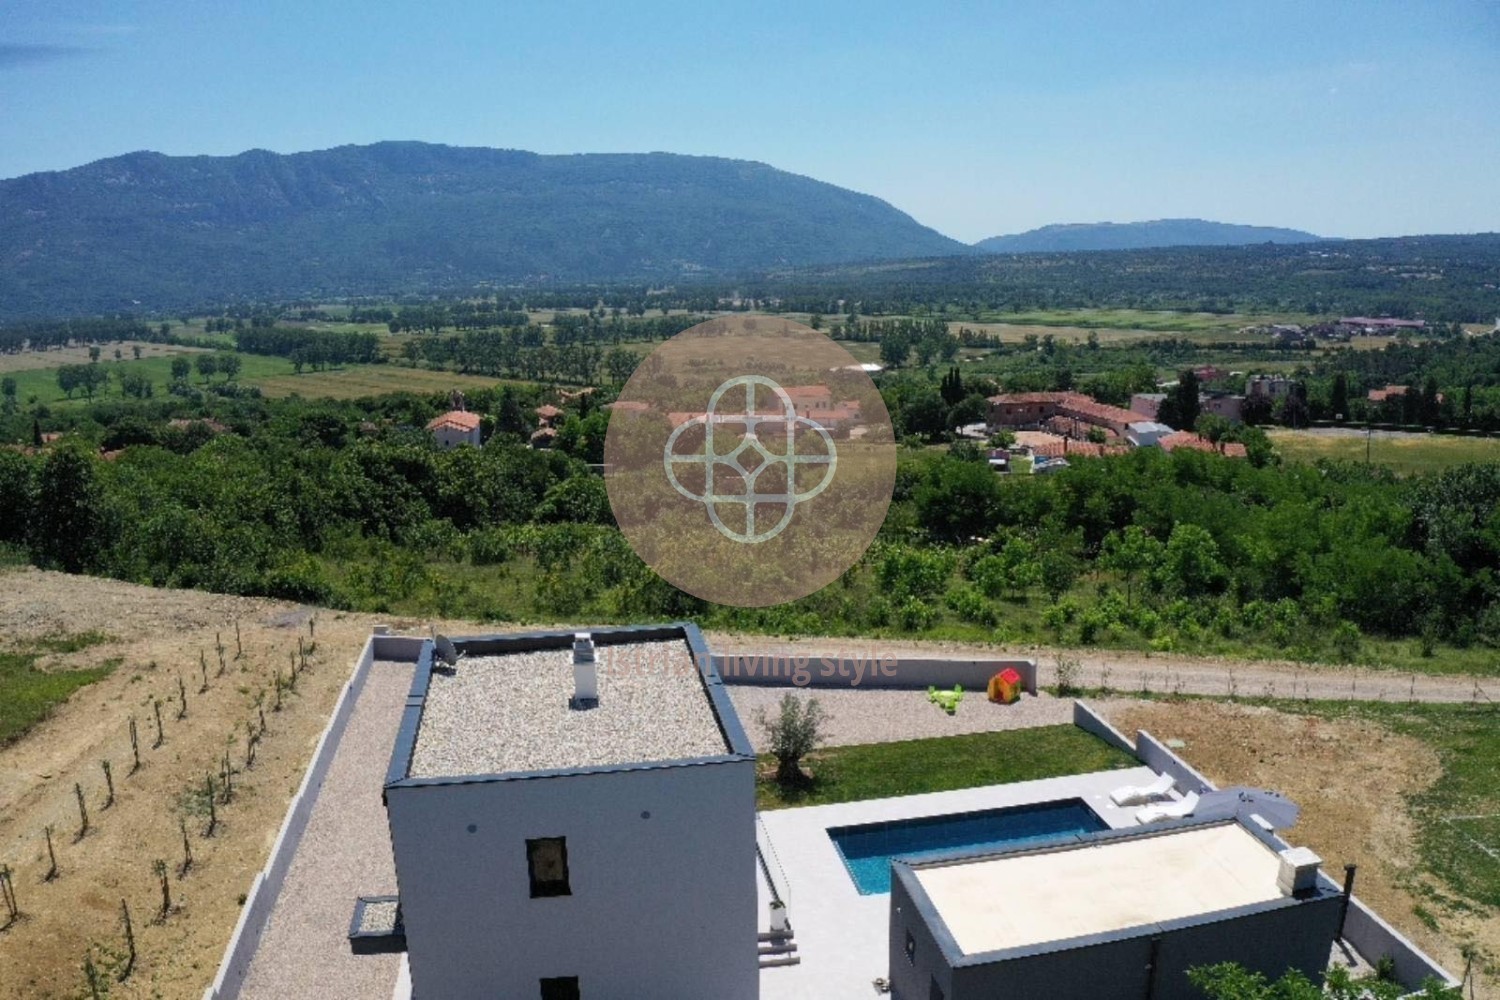 Krsan accommodation villas for sale in Krsan apartments to buy in Krsan holiday homes to buy in Krsan